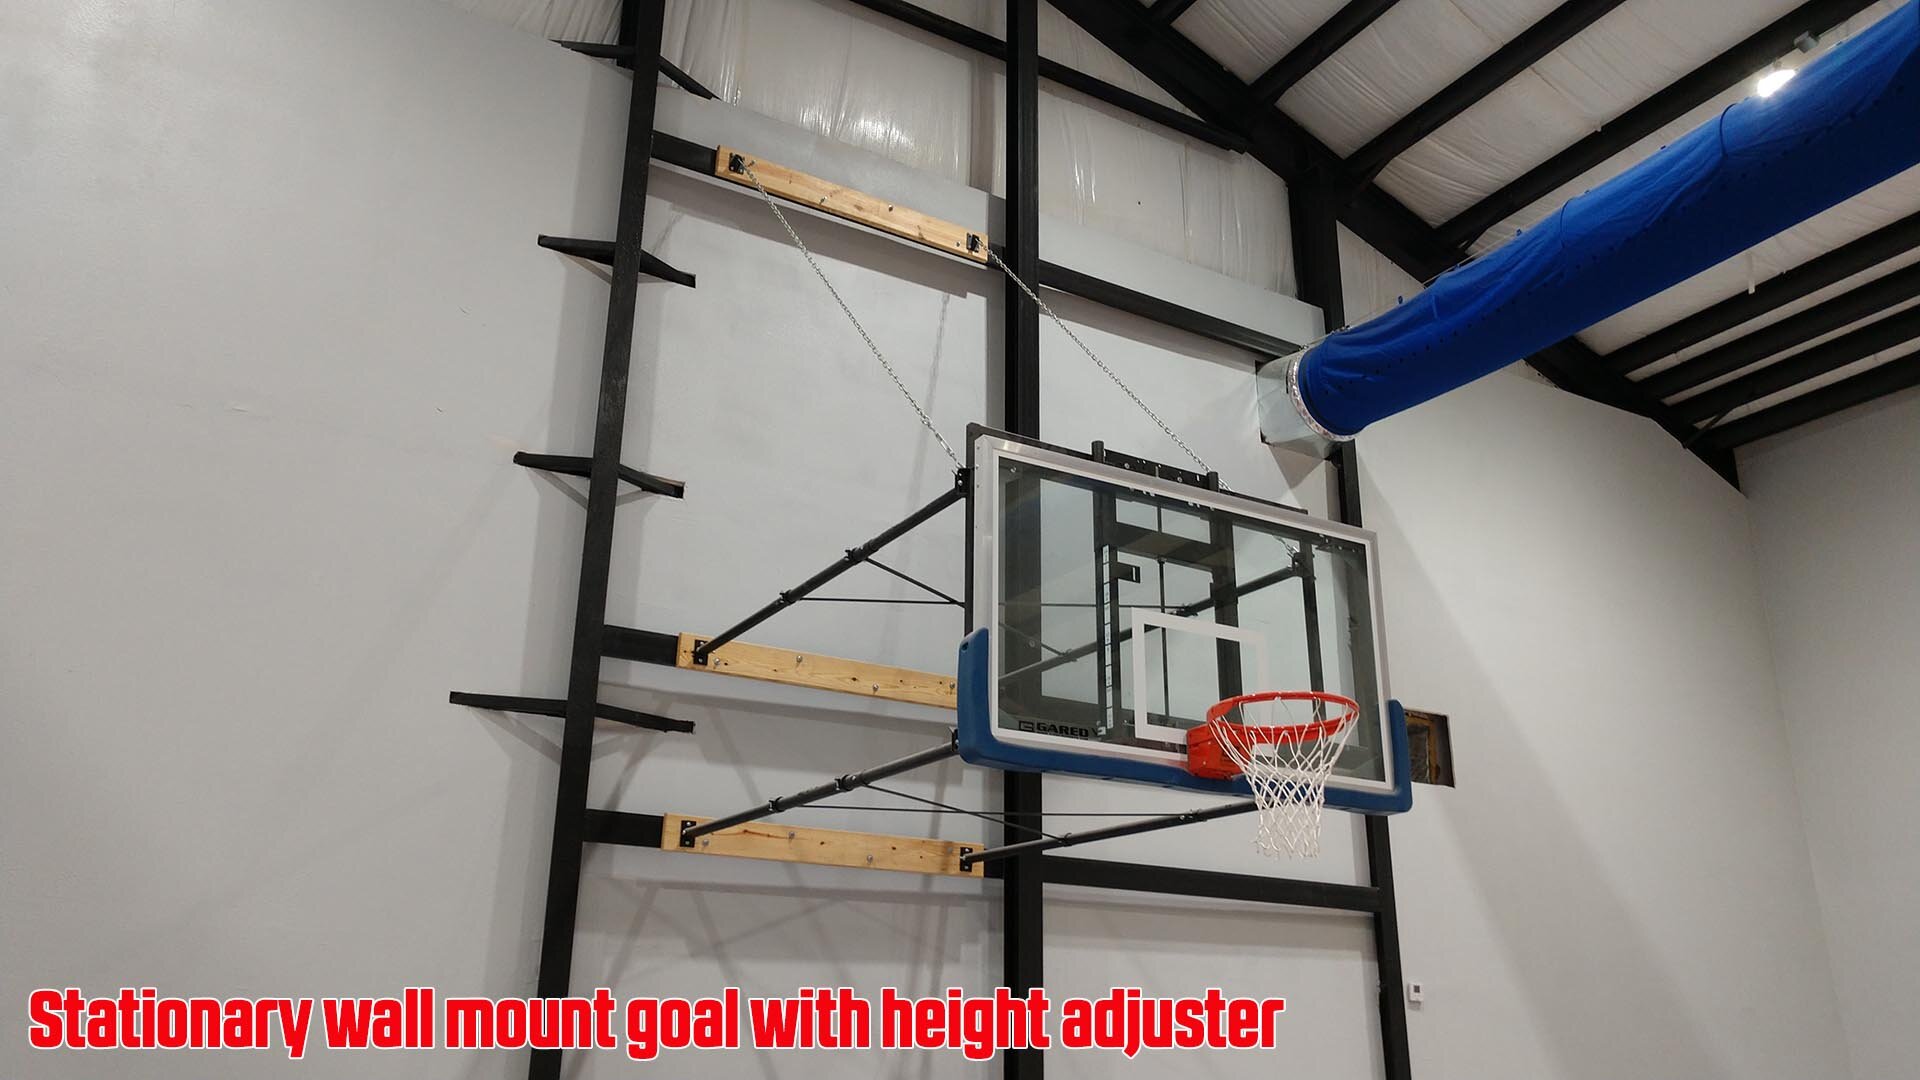 Gared Sports stationary wall mount basketball goal with manual height adjuster